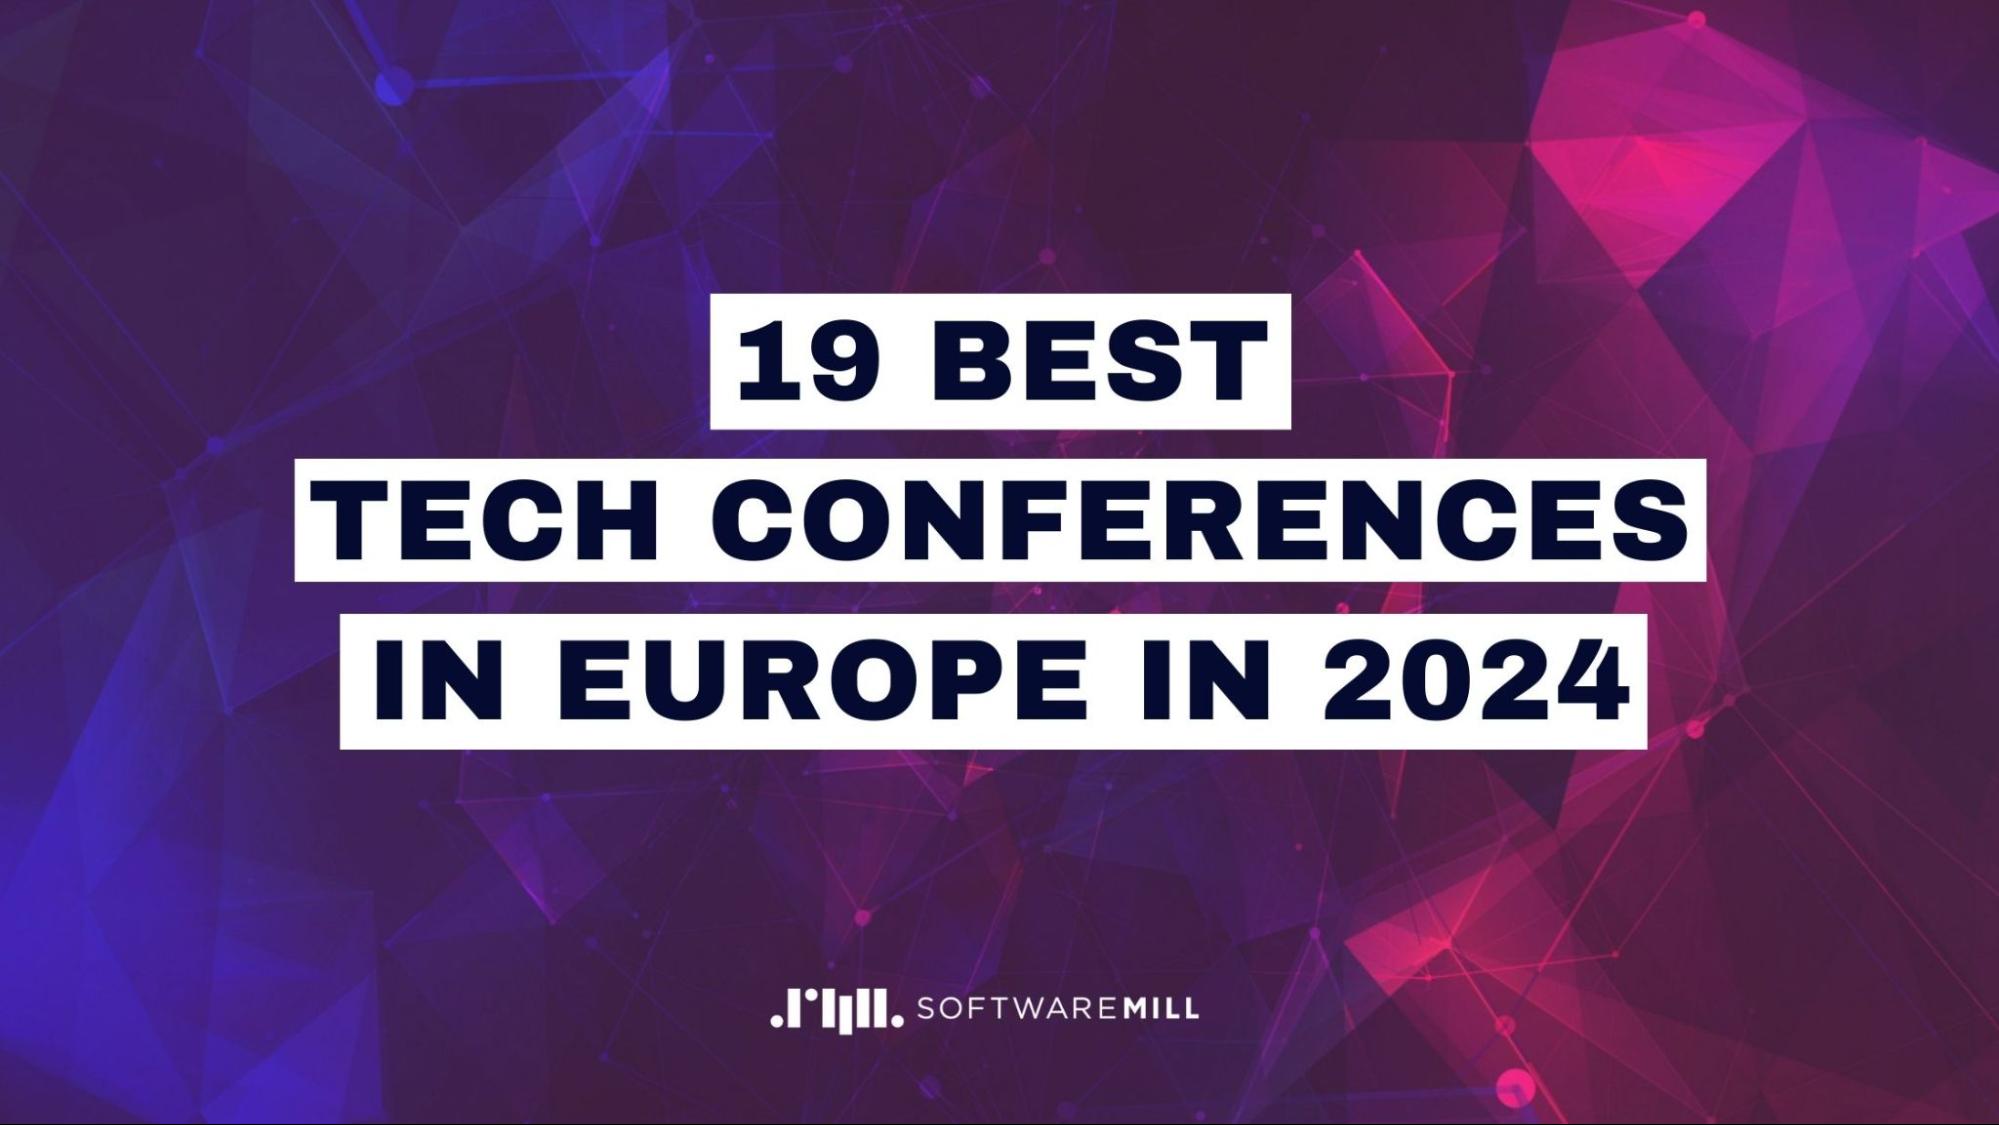 19 Best Tech Conferences in Europe in 2024 webp image